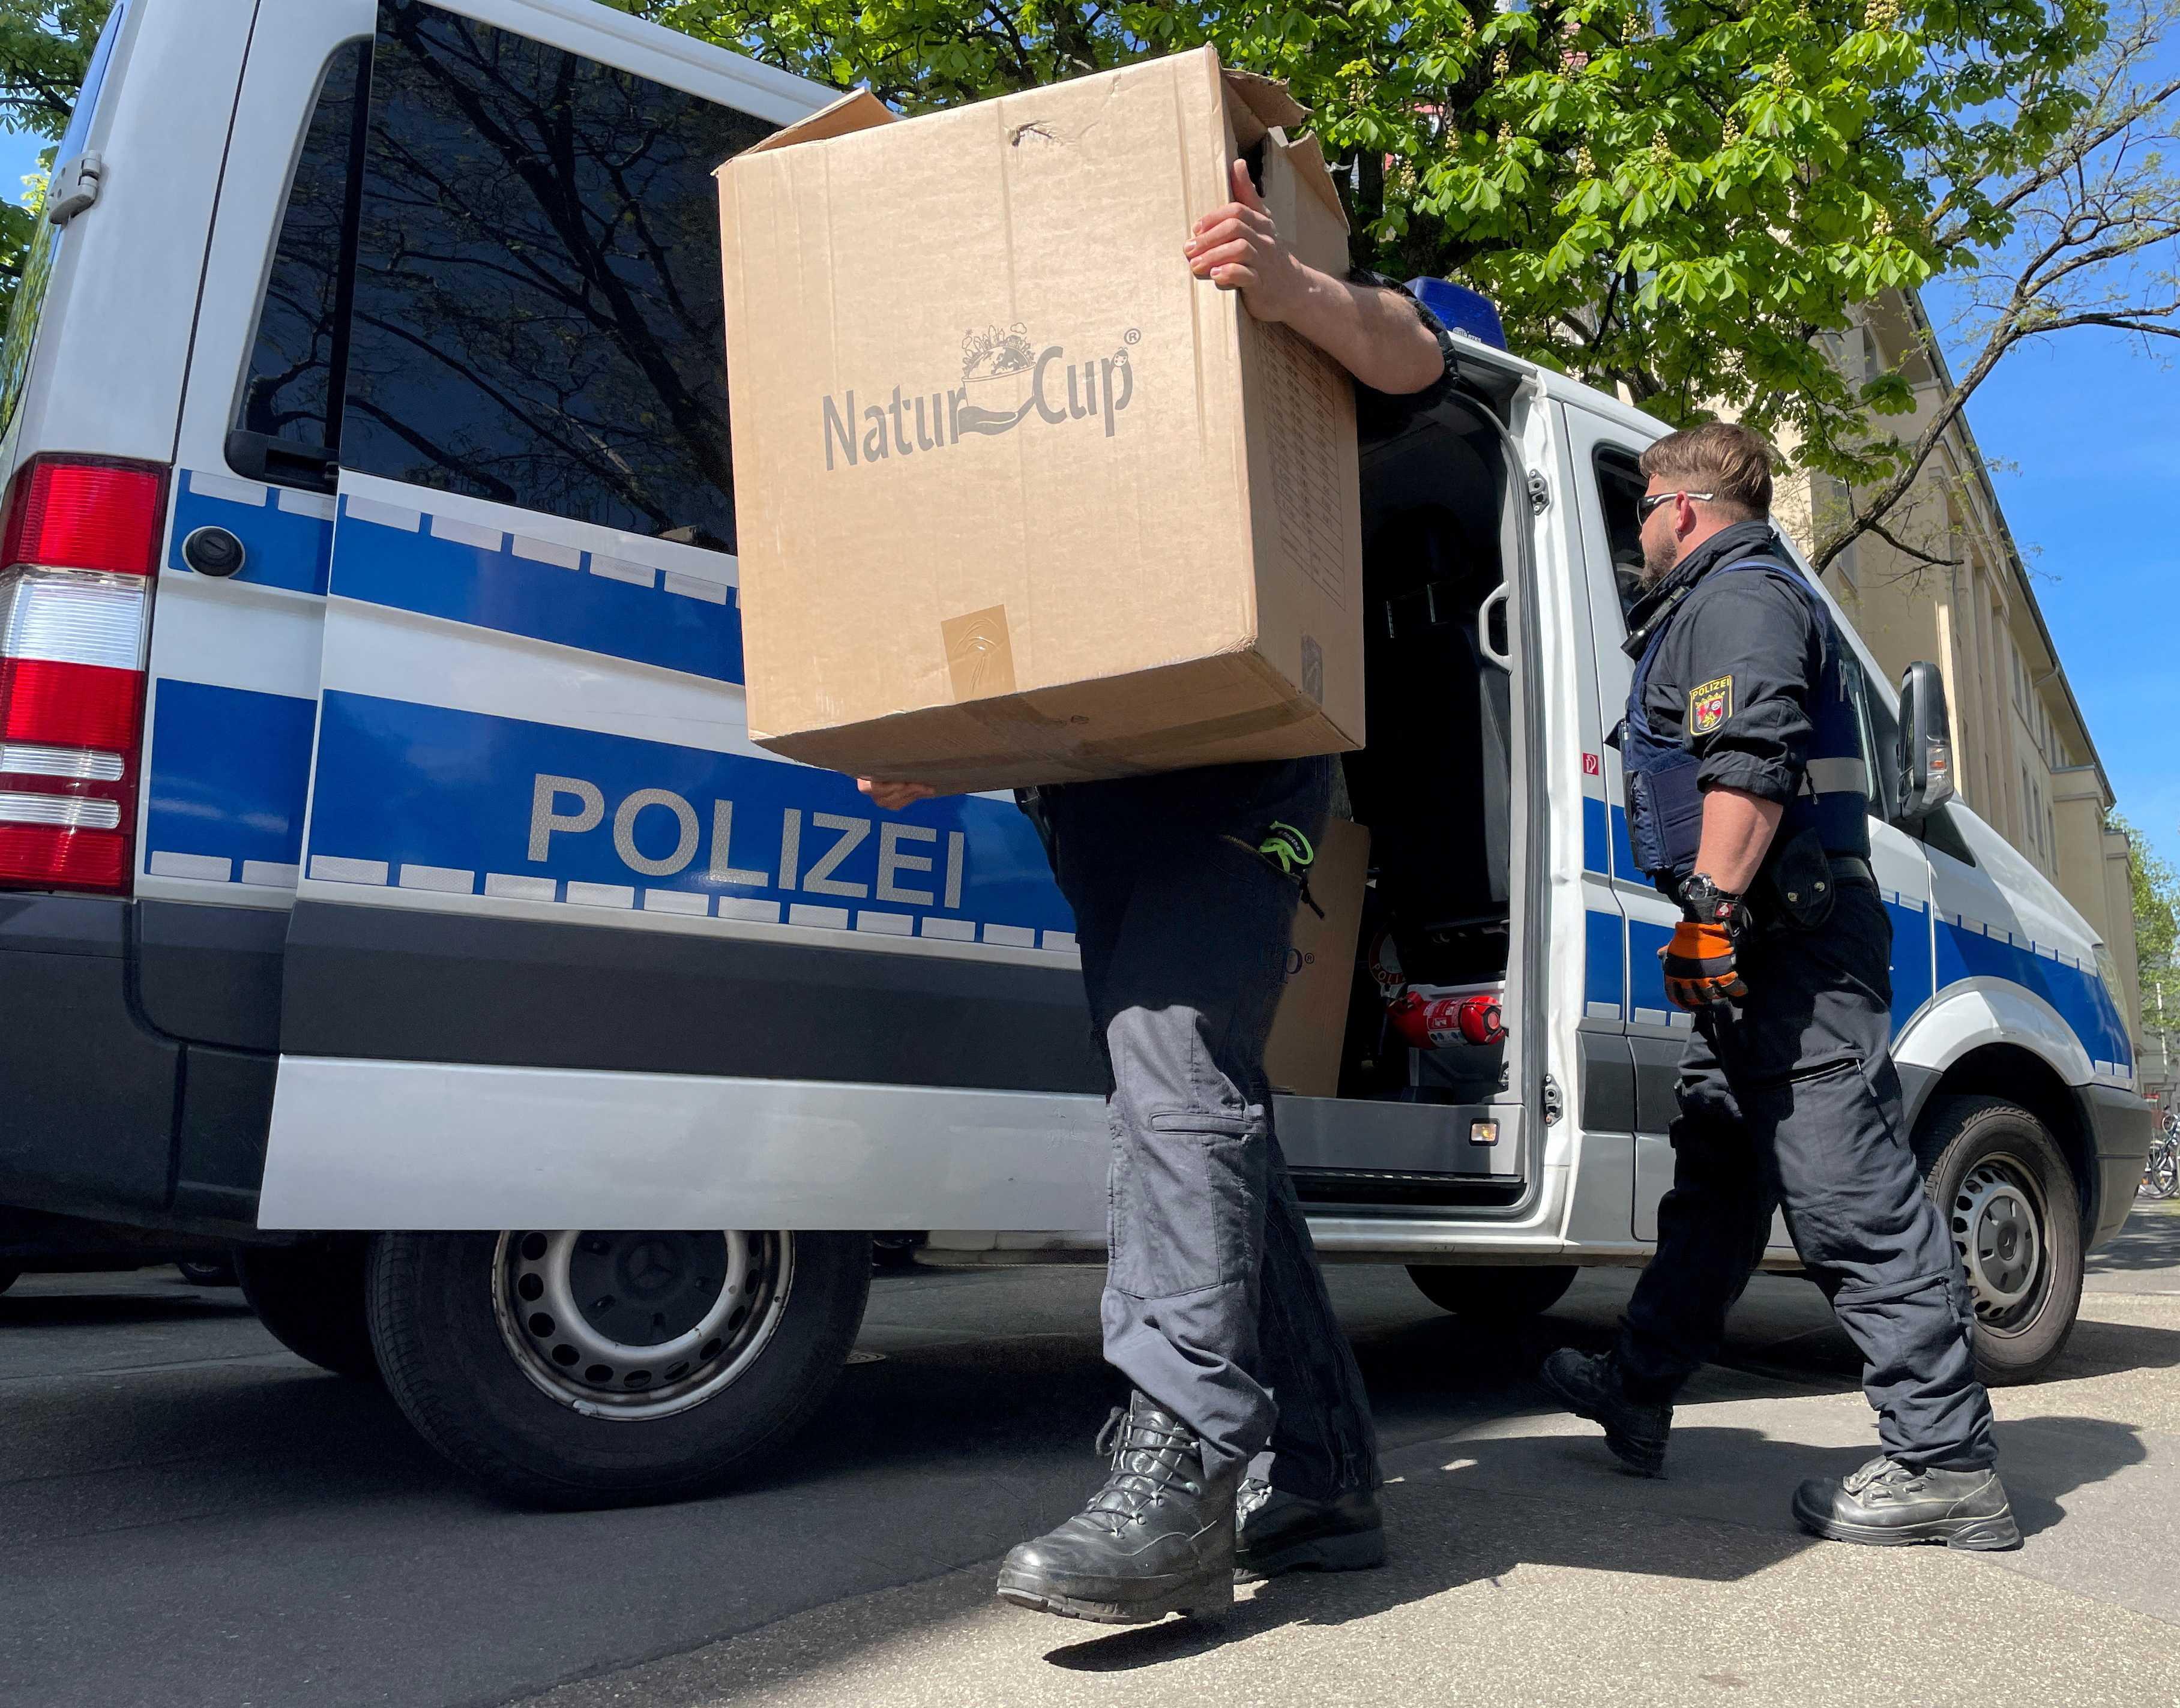 Police officers carry boxes into a police building in Mainz, Germany, May 3, after German police arrested dozens of people across the country in an investigation of the Italian 'Ndrangheta organised crime group. Photo: Reuters